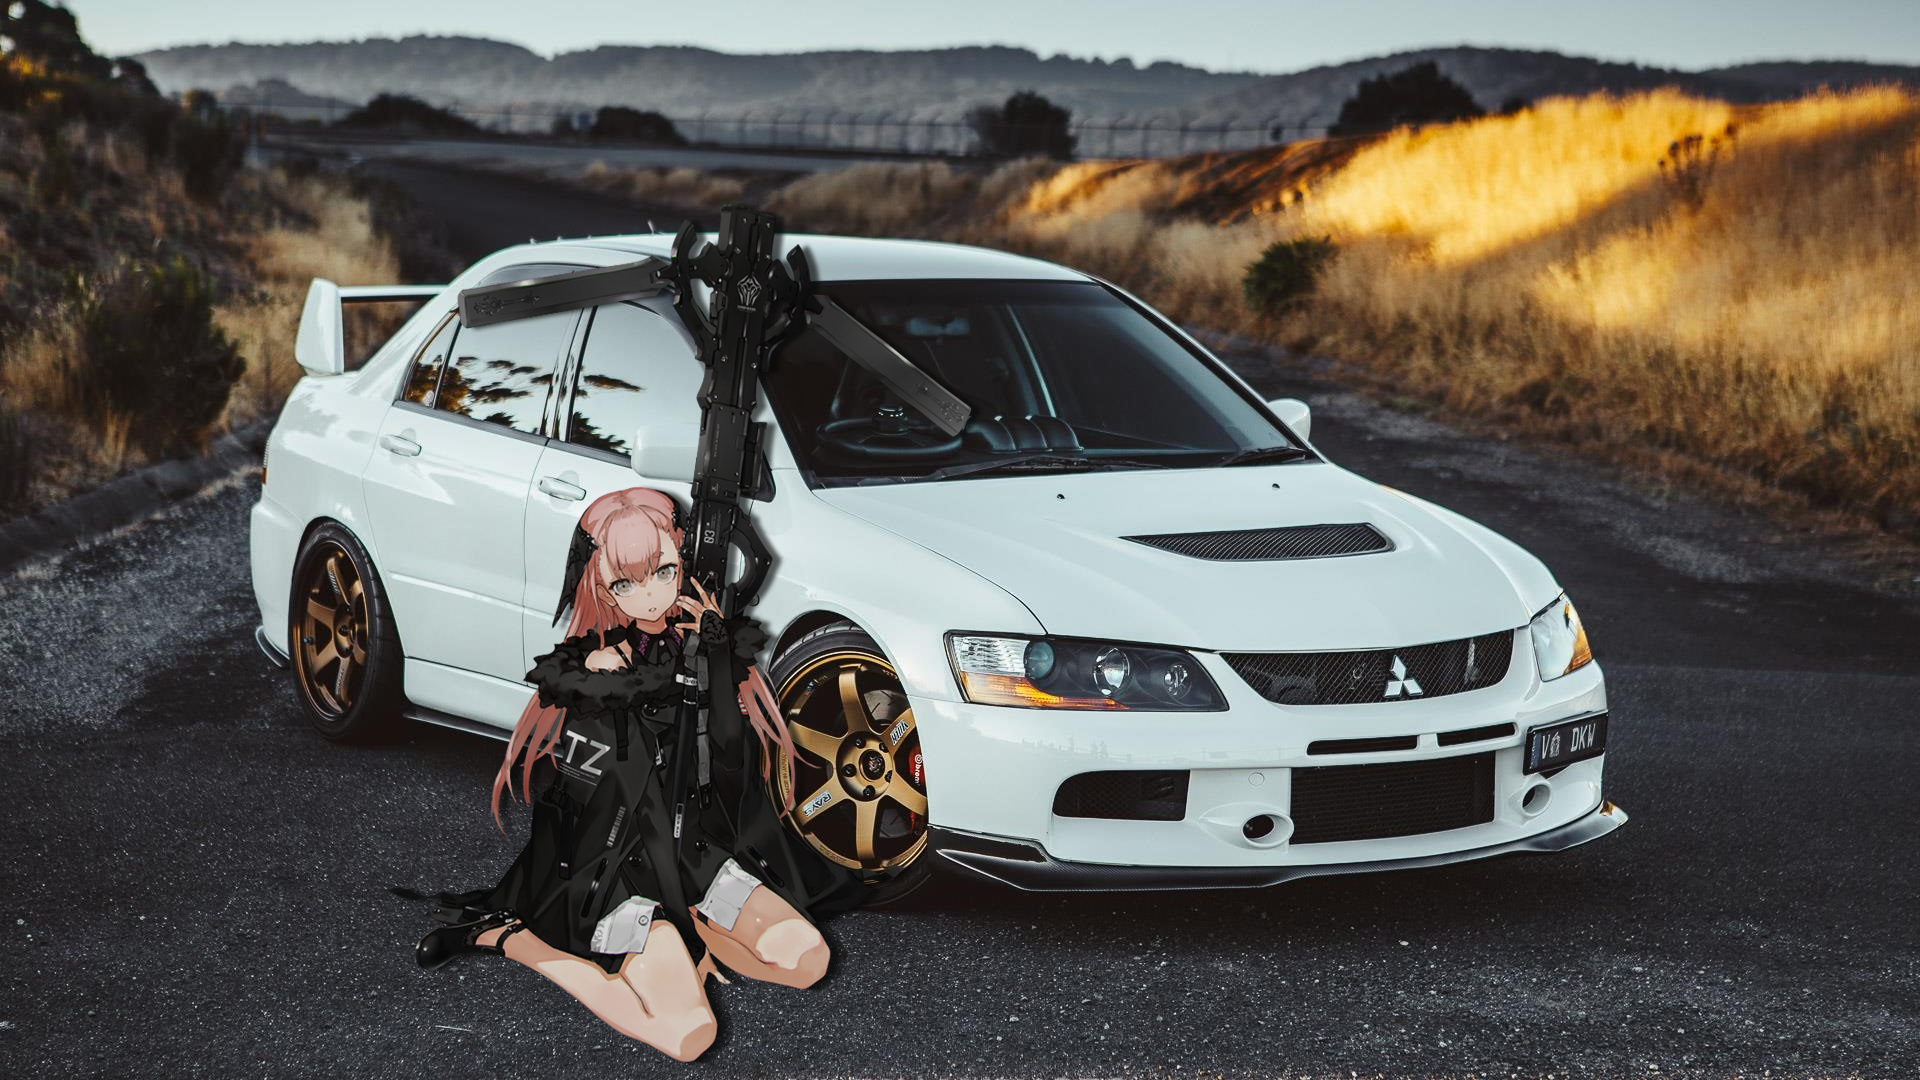 Anime Girls JDM Car Picture In Picture Mitsubishi Lancer EVO Wallpaper -  Resolution:1920x1080 - ID:1231110 